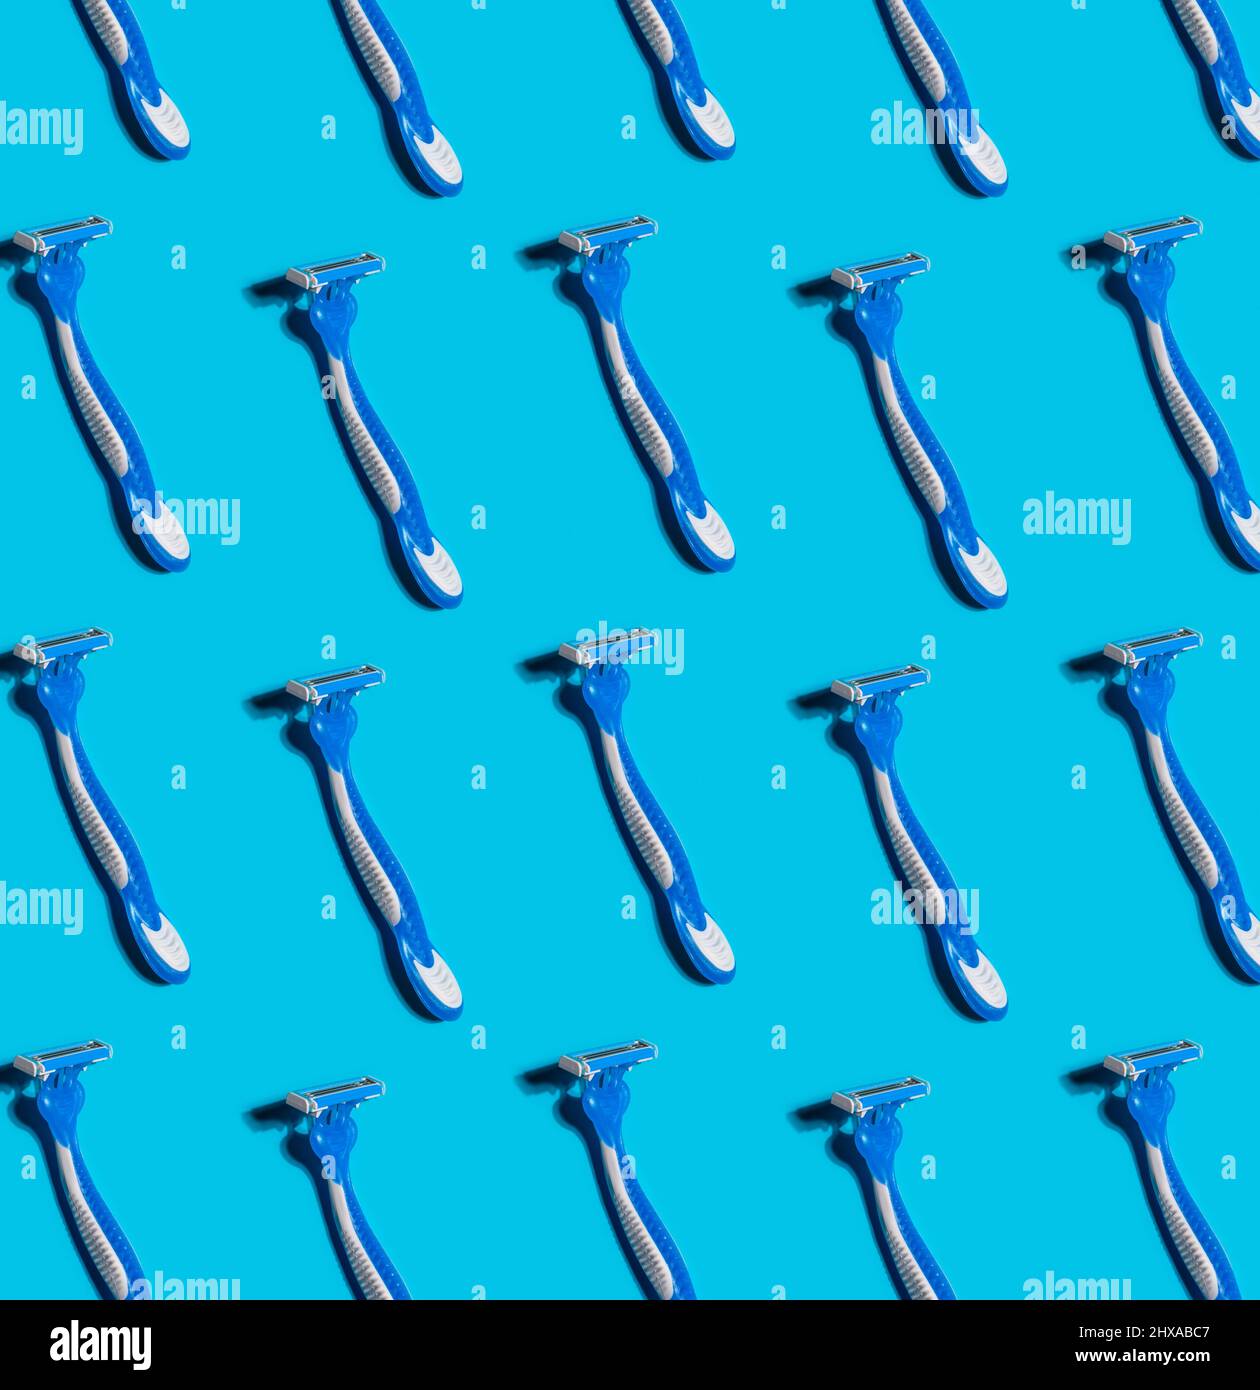 pattern with disposable shaving razors on blue background Stock Photo